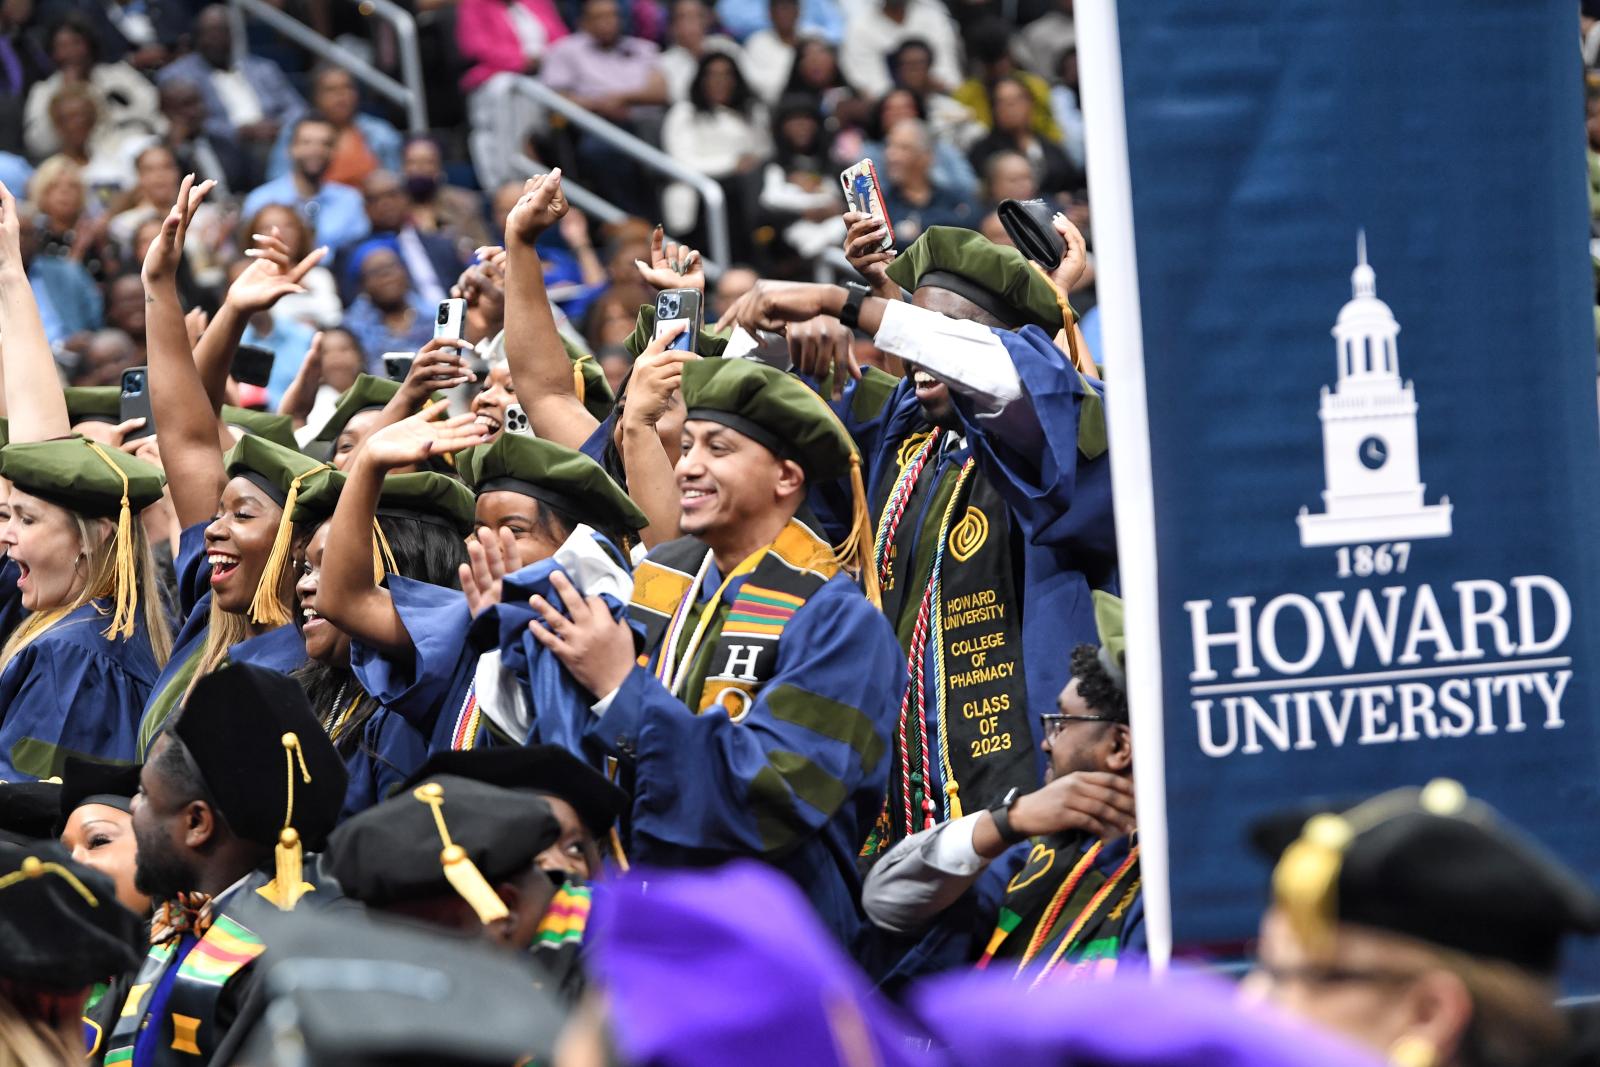 Graduates cheer at the 155th Commencement Ceremony at Howard University